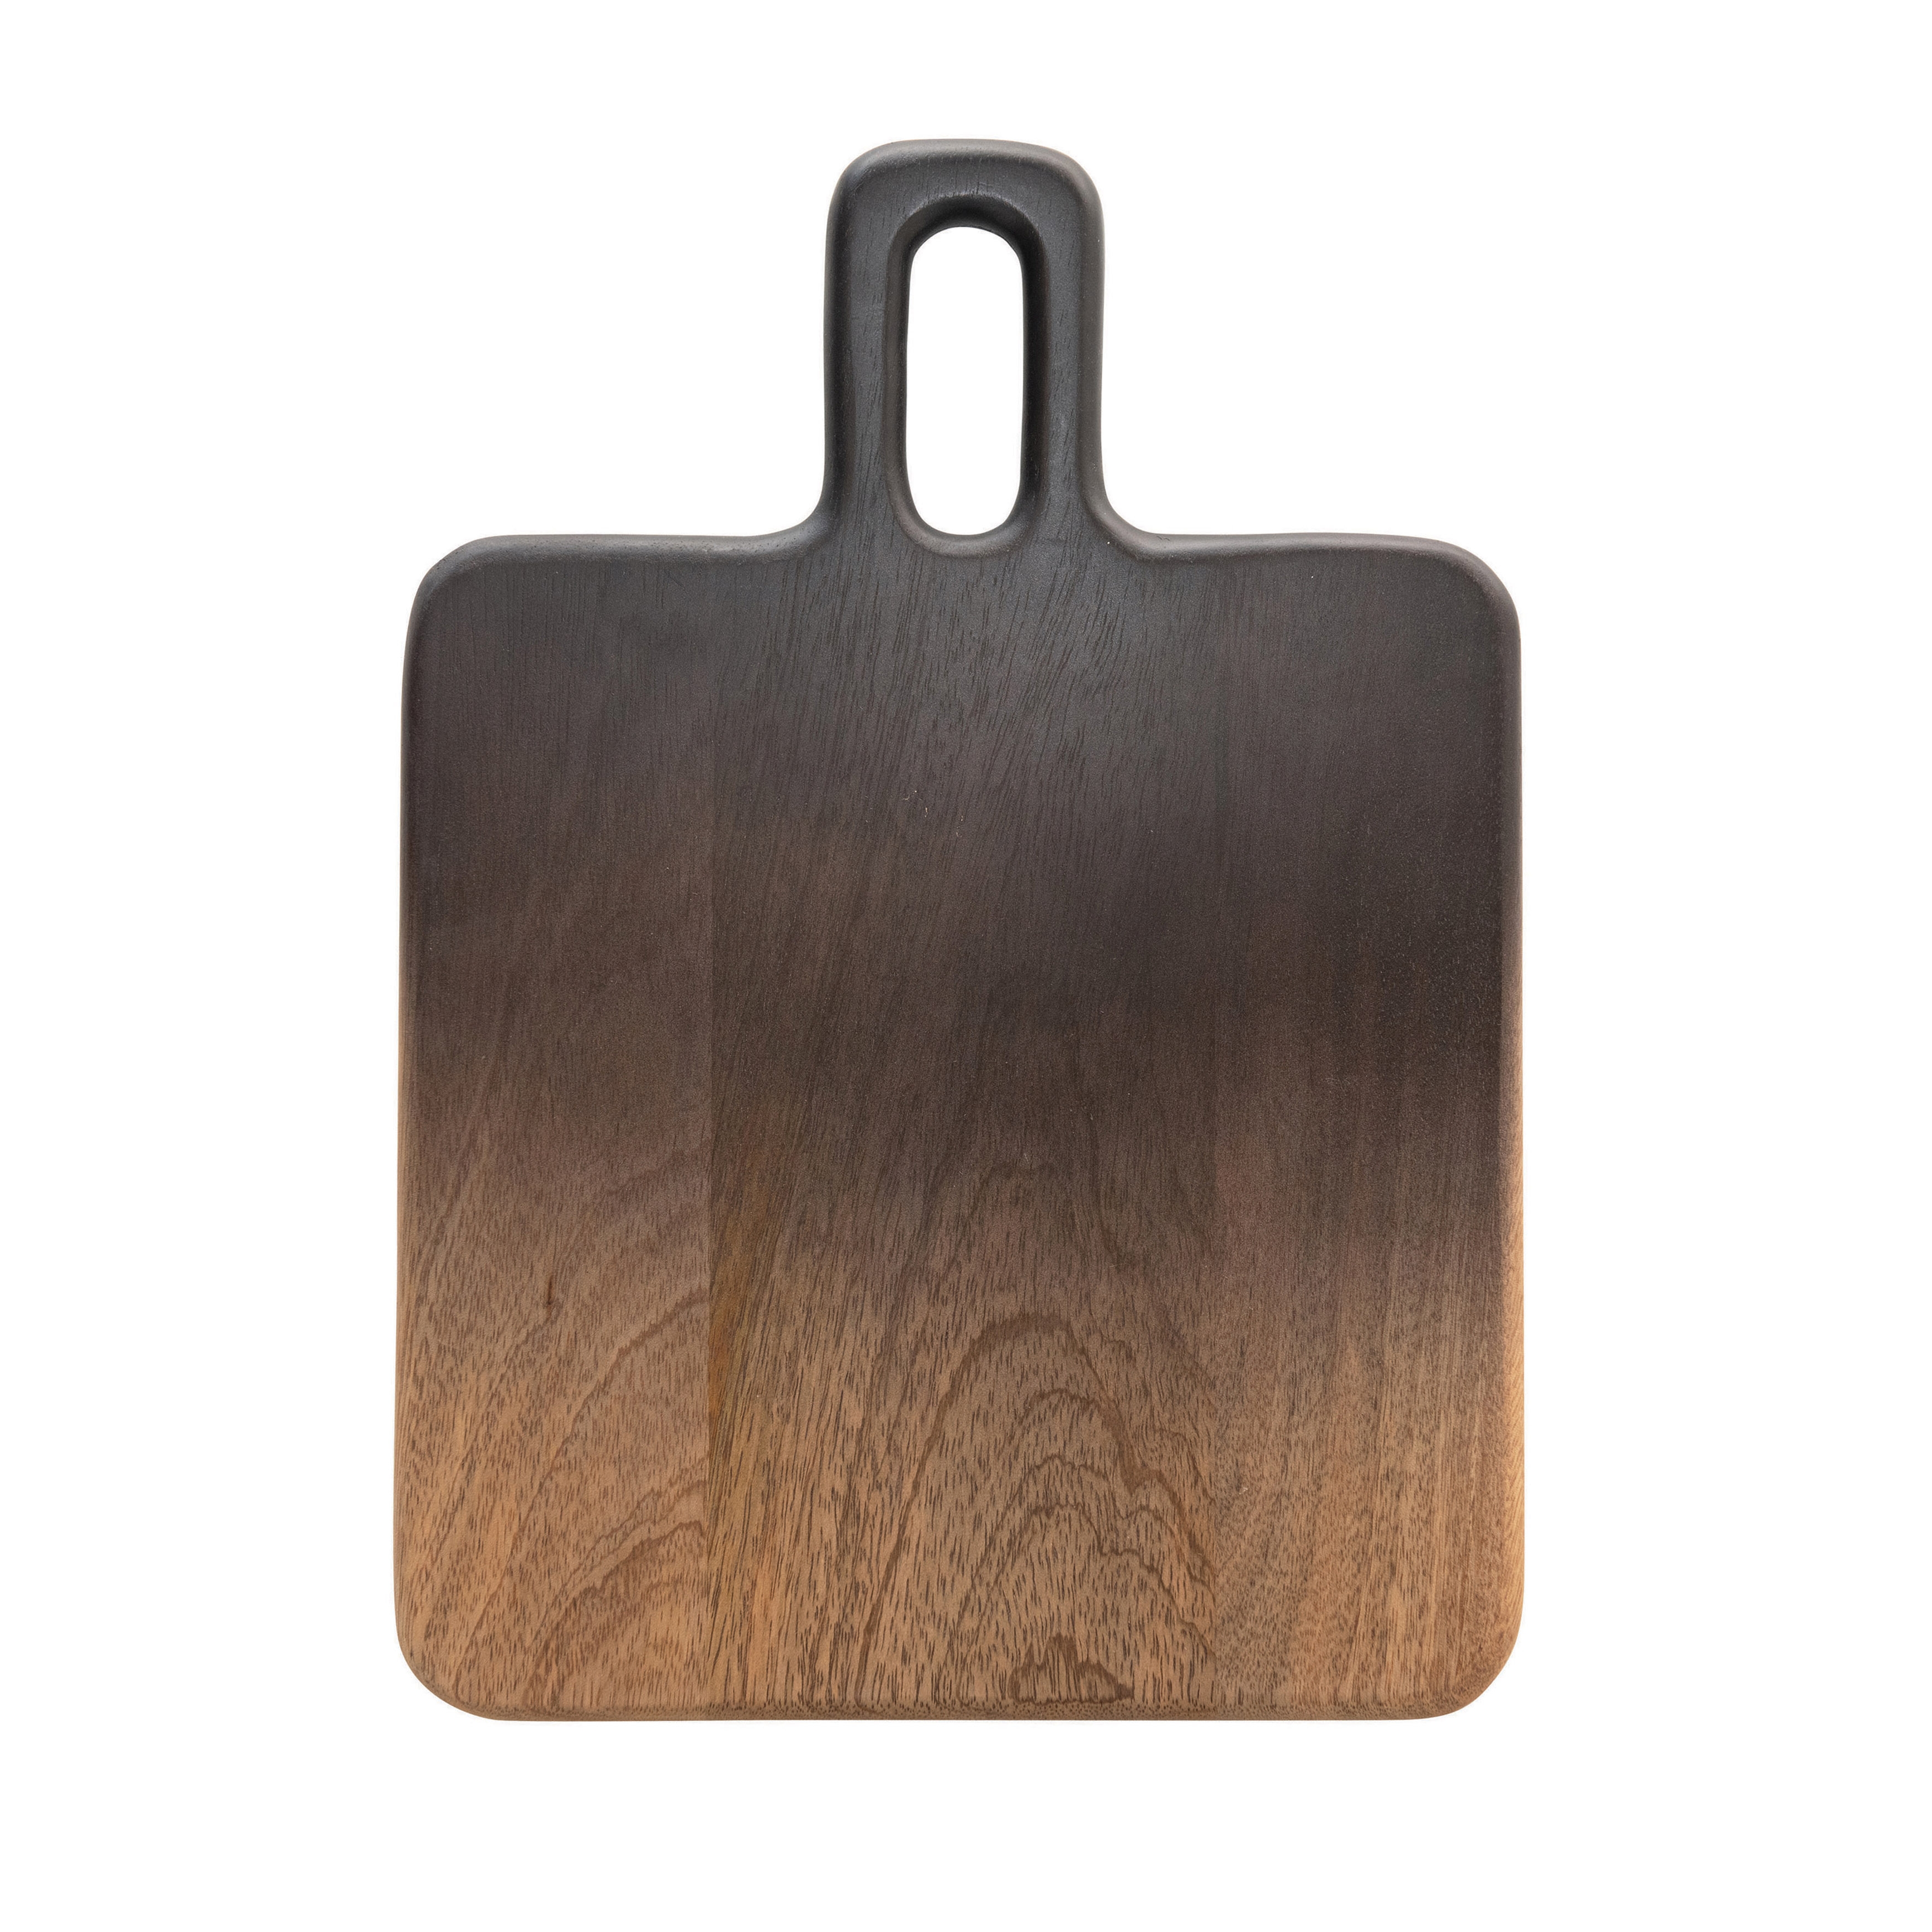 Mango Wood Cheese/Cutting Board with Handle, Black & Natural Ombre - Image 0